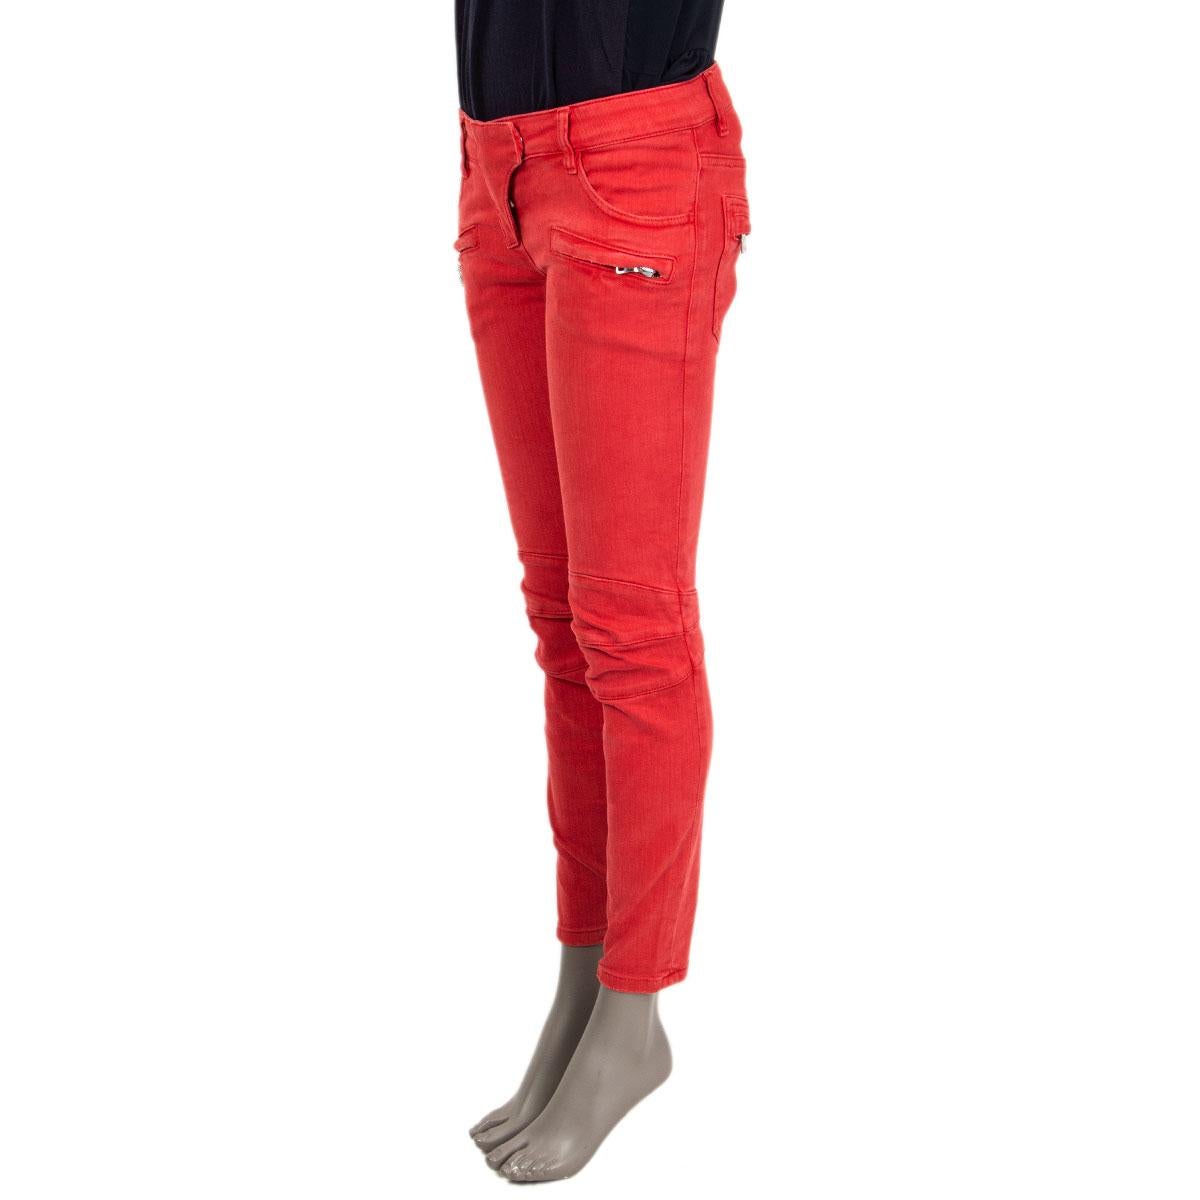 100% authentic Balmain skinny low-rise biker jeans in red cotton (98%) elastane (2%) with two slit and two zipper pockets on the front. Regular length and zippers along the leg inside. Have been worn and are in excellent condition.

Measurements
Tag